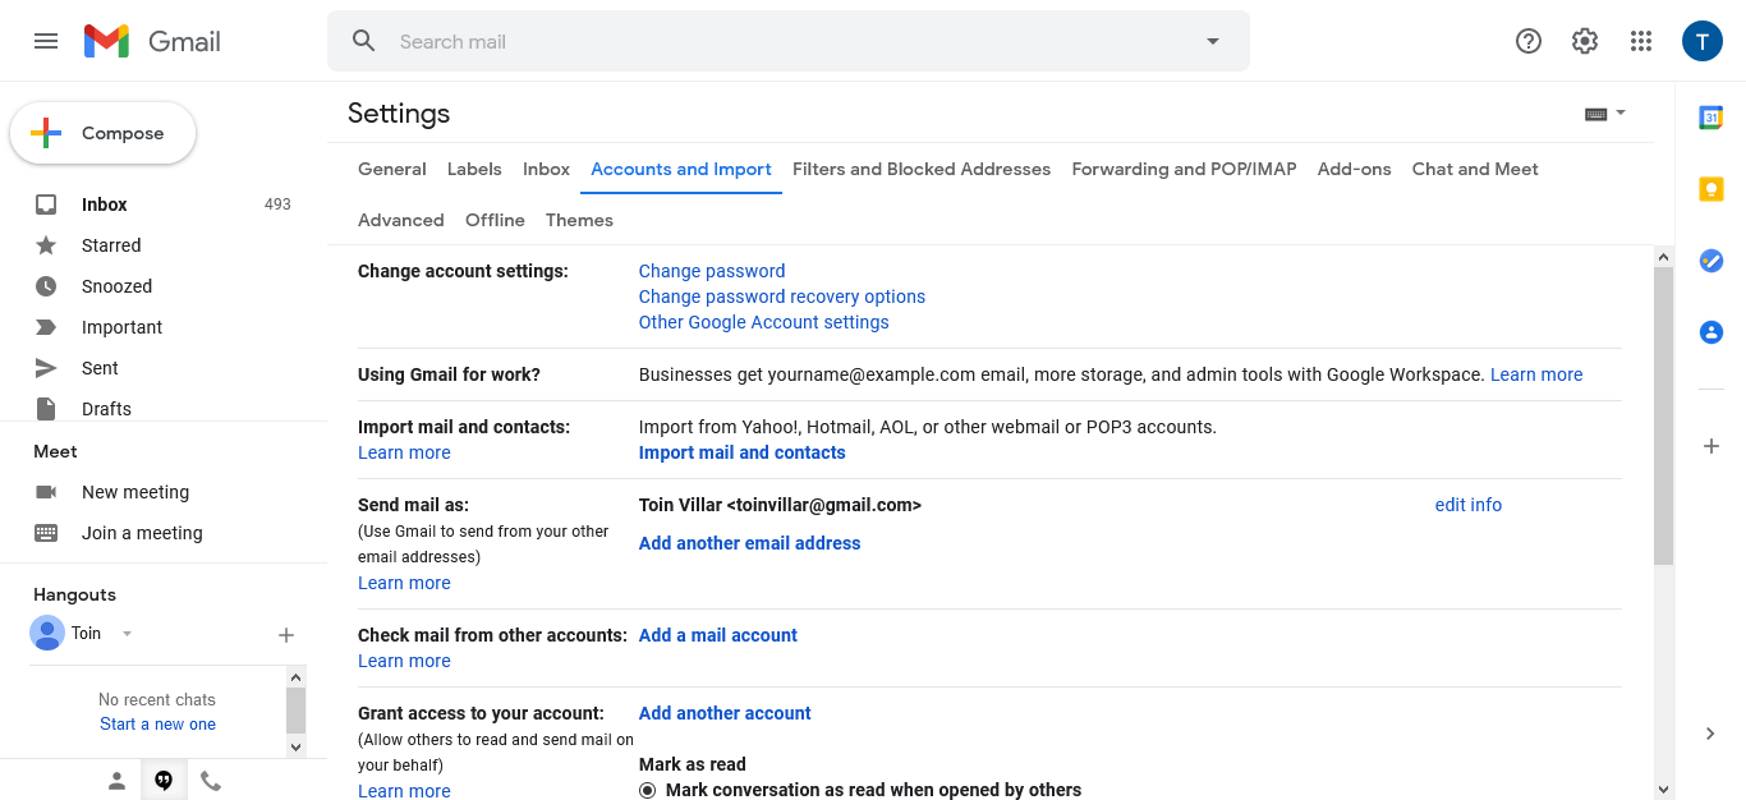 Gmail settings' accounts and import tab.